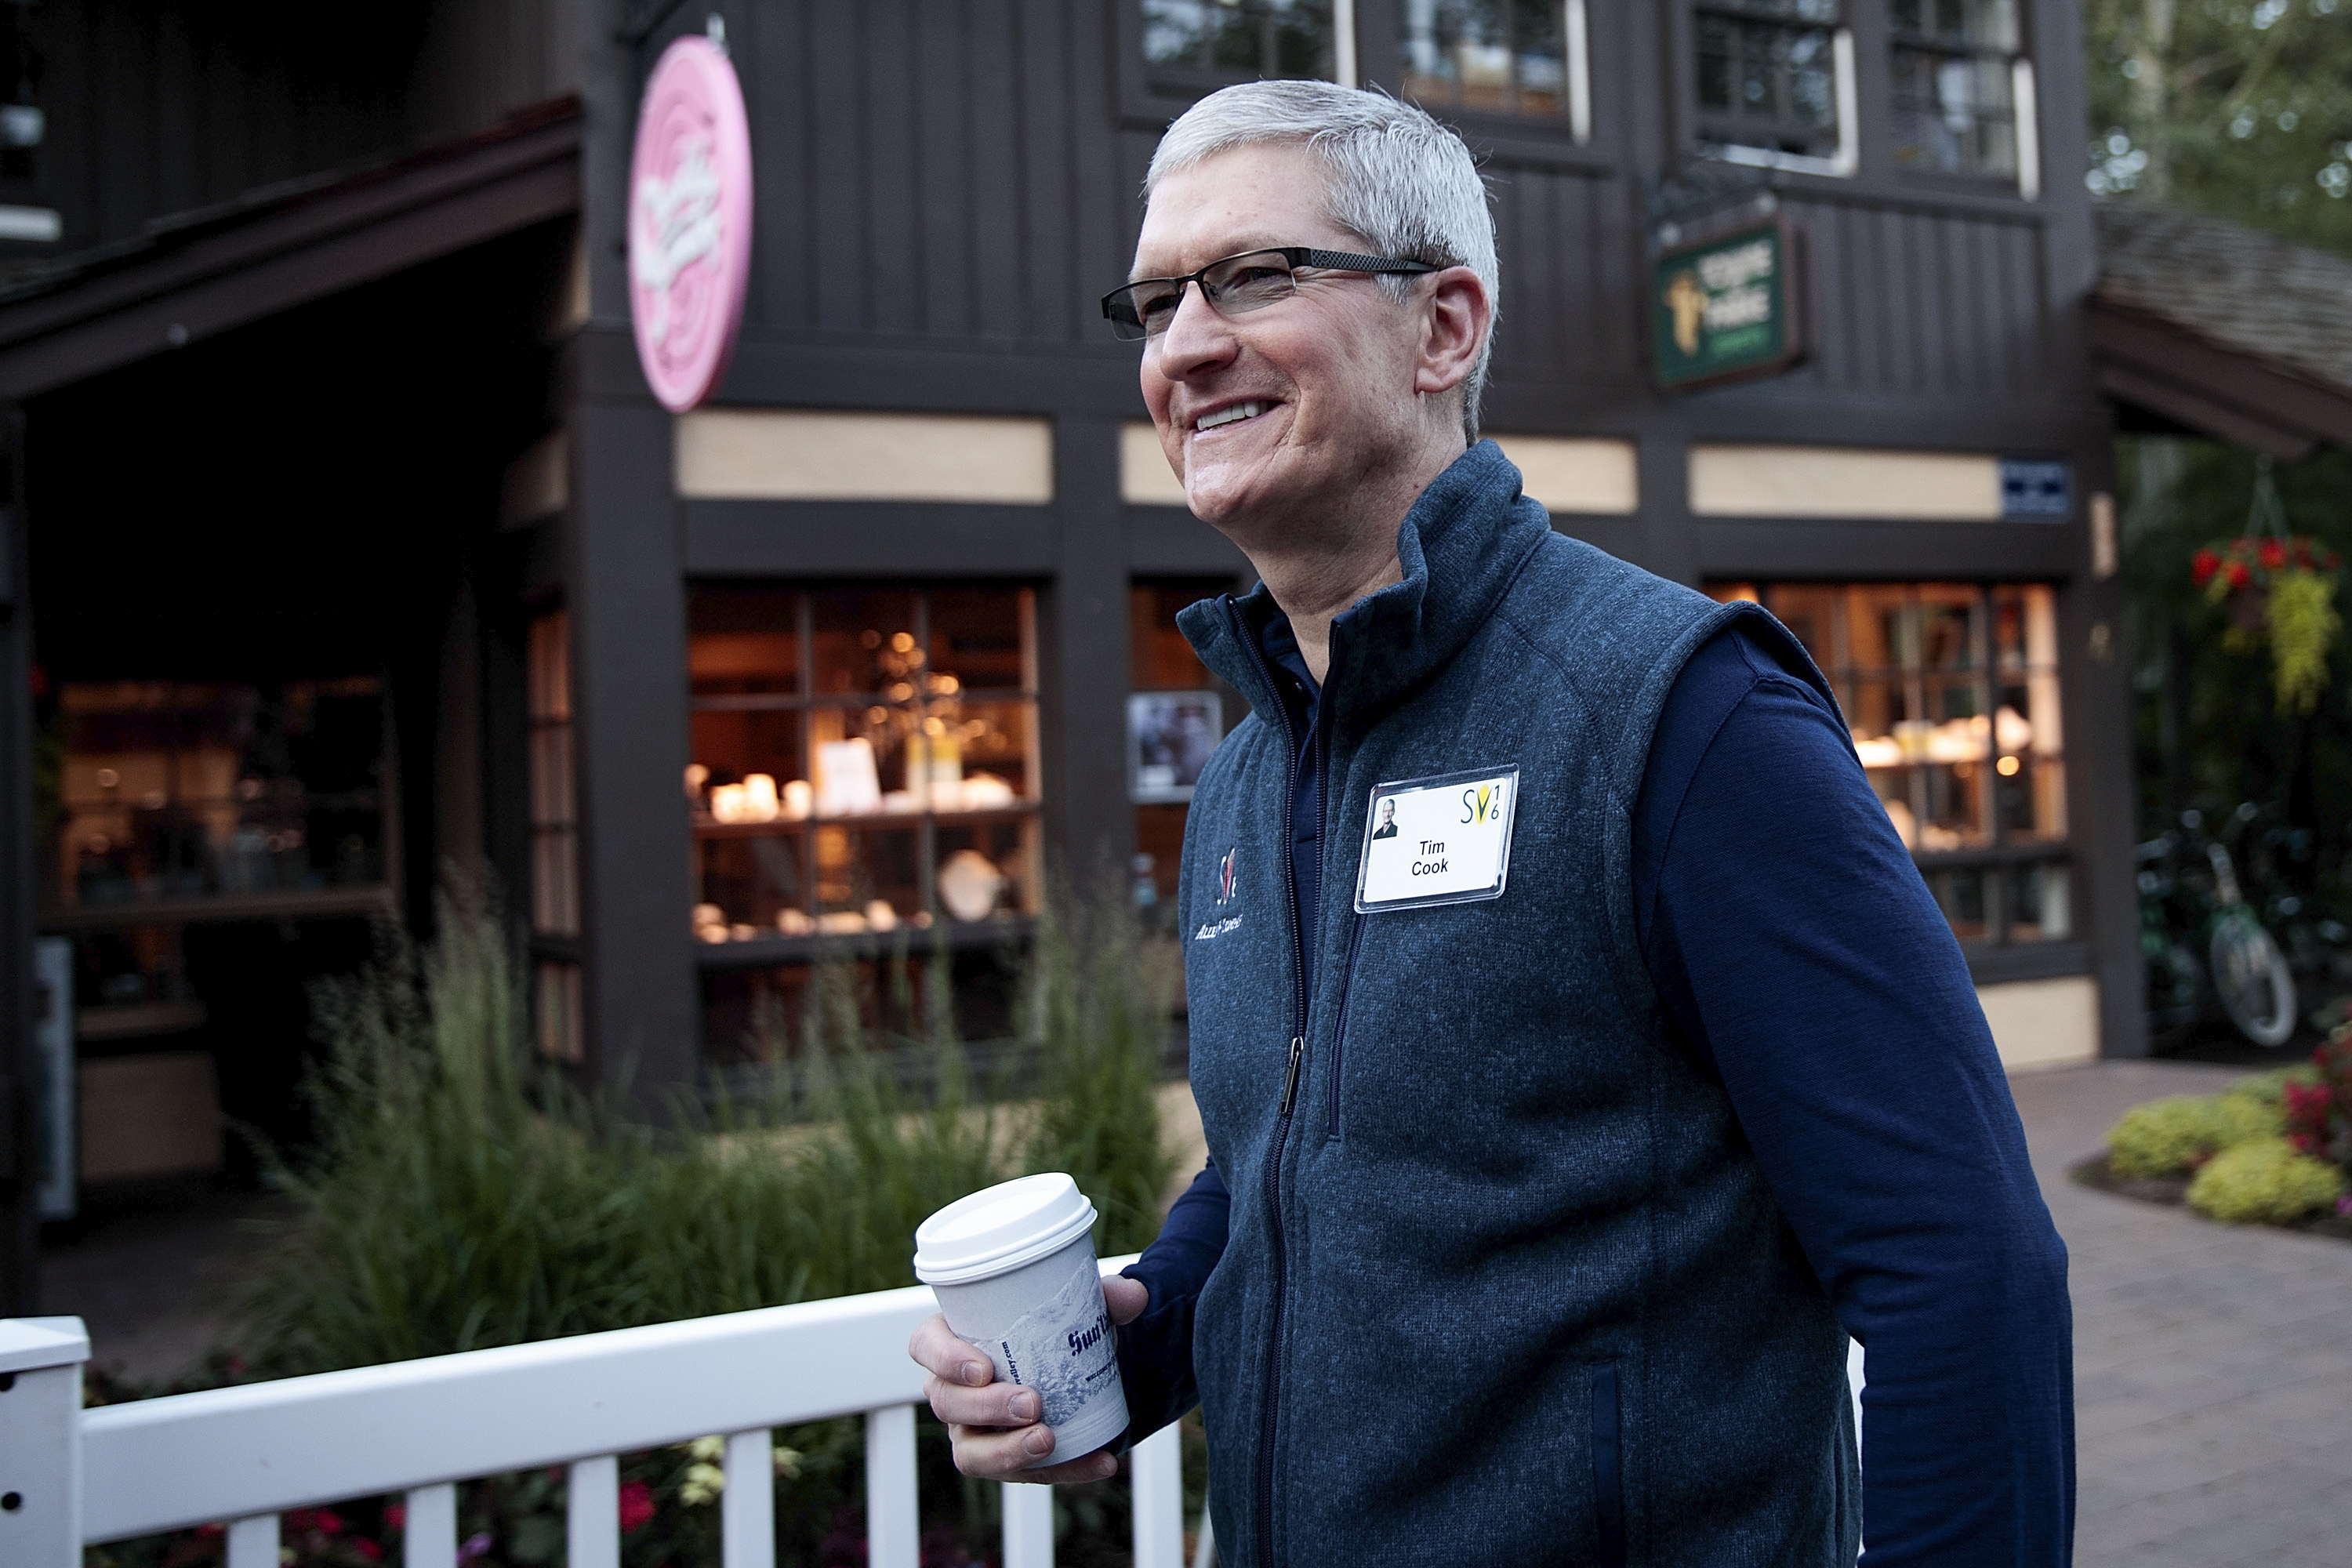 SUN VALLEY, ID - JULY 6: Tim Cook, chief executive officer of Apple Inc., attends the annual Allen & Company Sun Valley Conference, July 6, 2016 in Sun Valley, Idaho. Every July, some of the world's most wealthy and powerful businesspeople from the media, finance, technology and political spheres converge at the Sun Valley Resort for the exclusive weeklong conference.   Drew Angerer/Getty Images/AFP